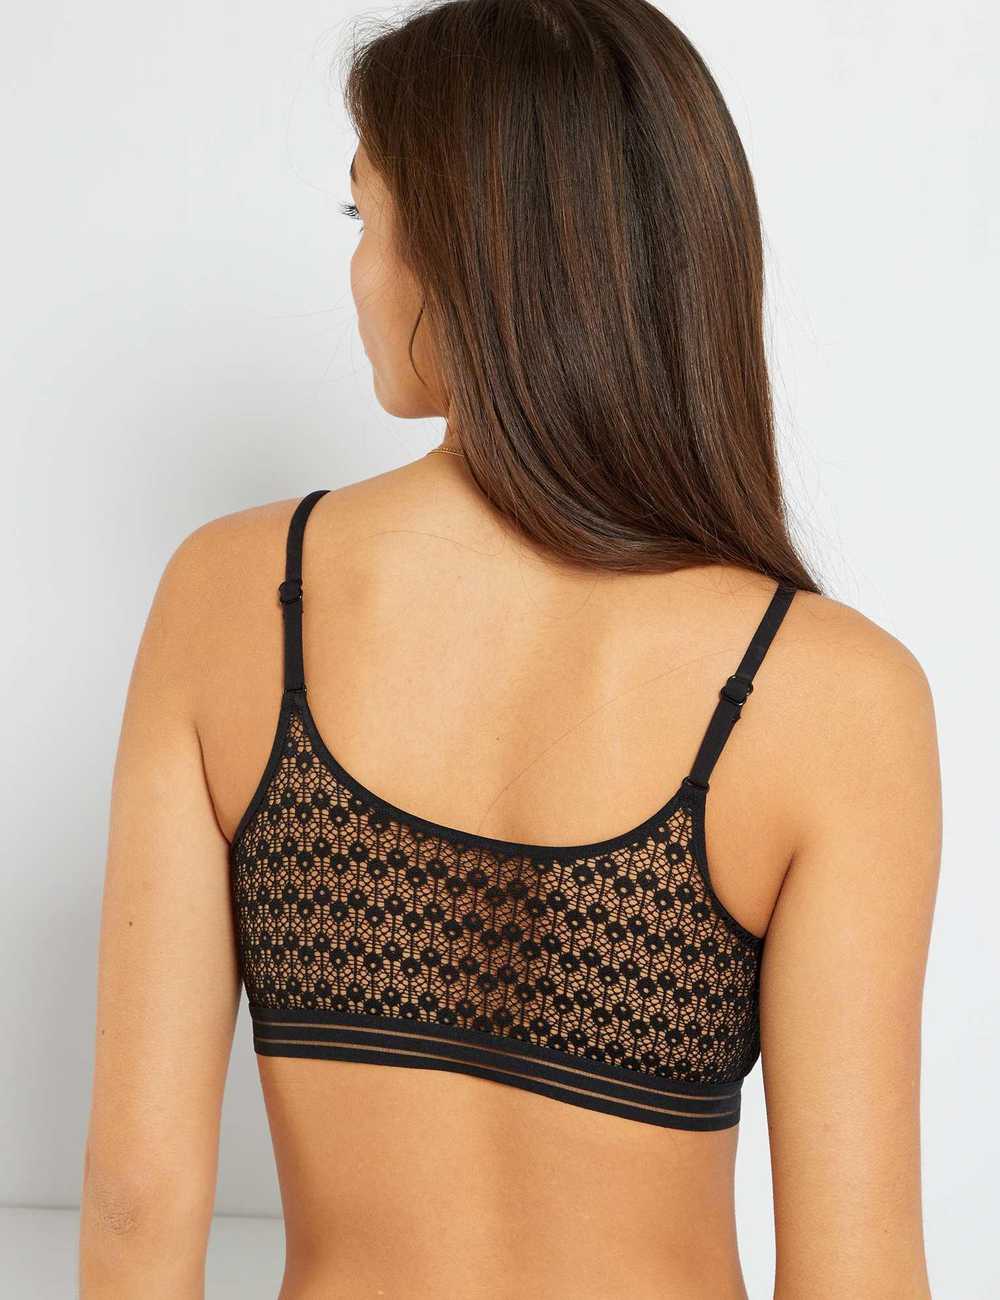 Buy Bralette with lace back Online in Dubai & the UAE